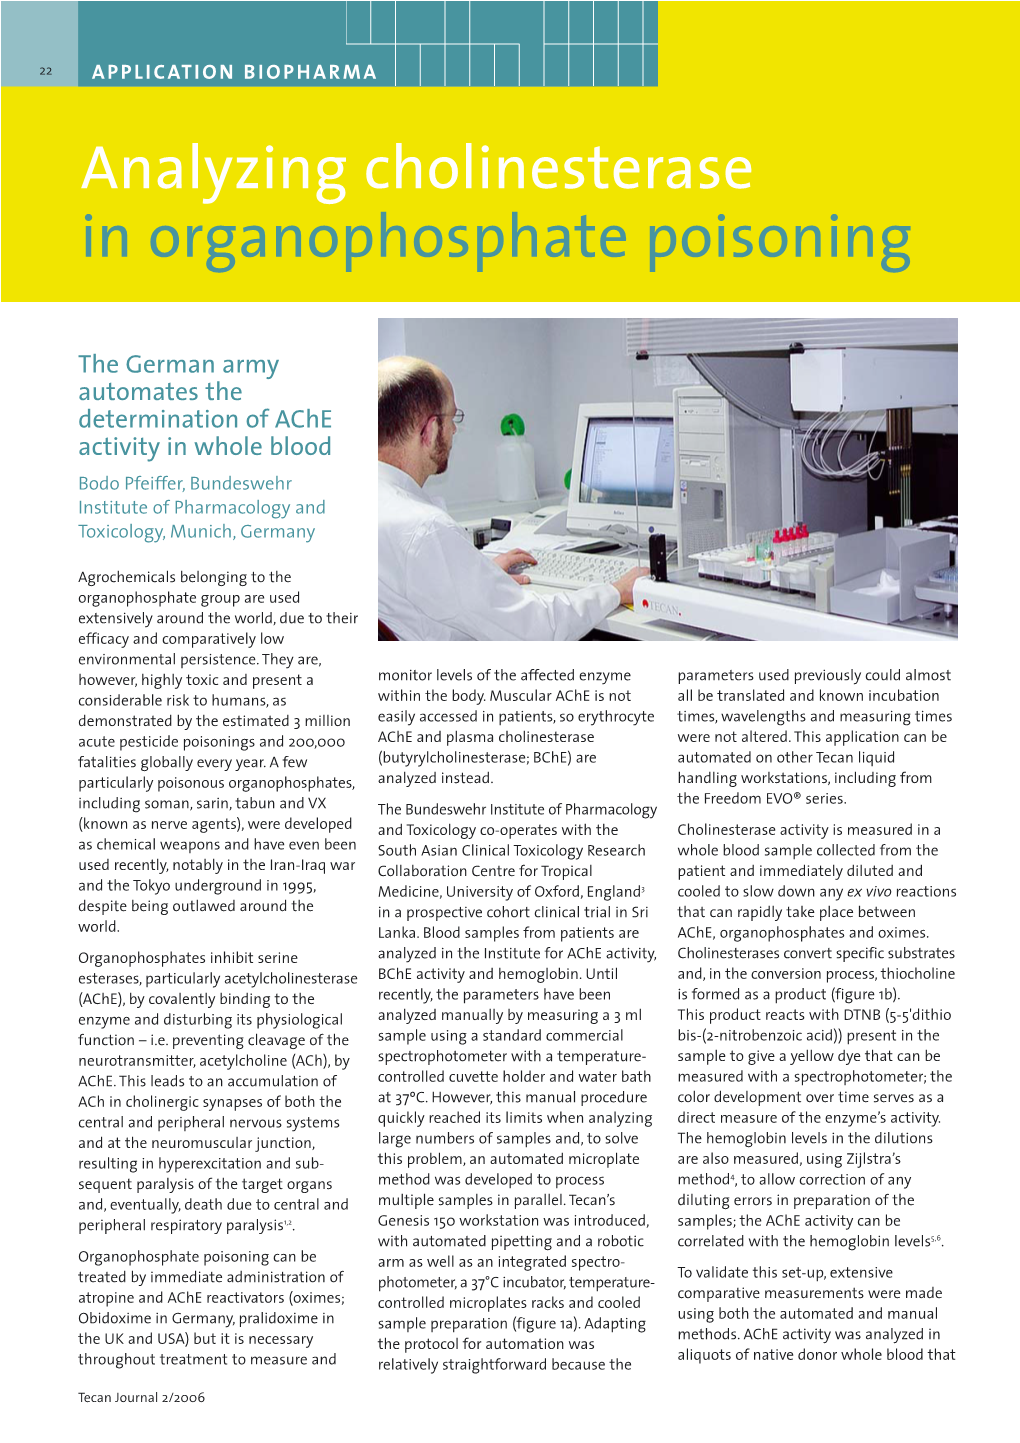 Analyzing Cholinesterase in Organophosphate Poisoning